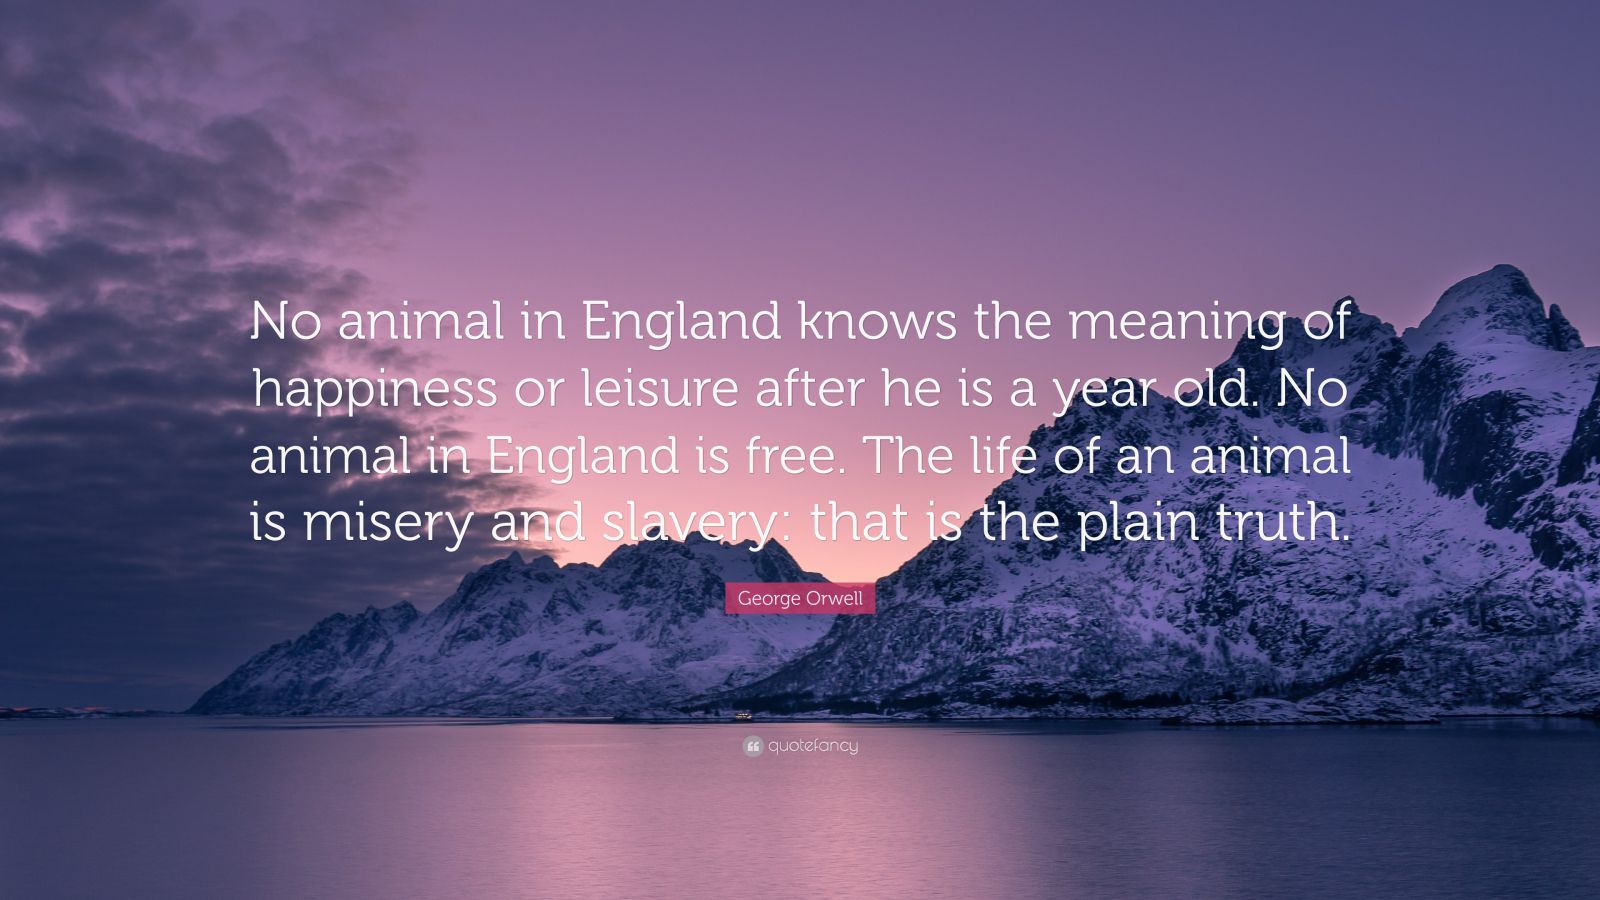 George Orwell Quote: "No animal in England knows the ...